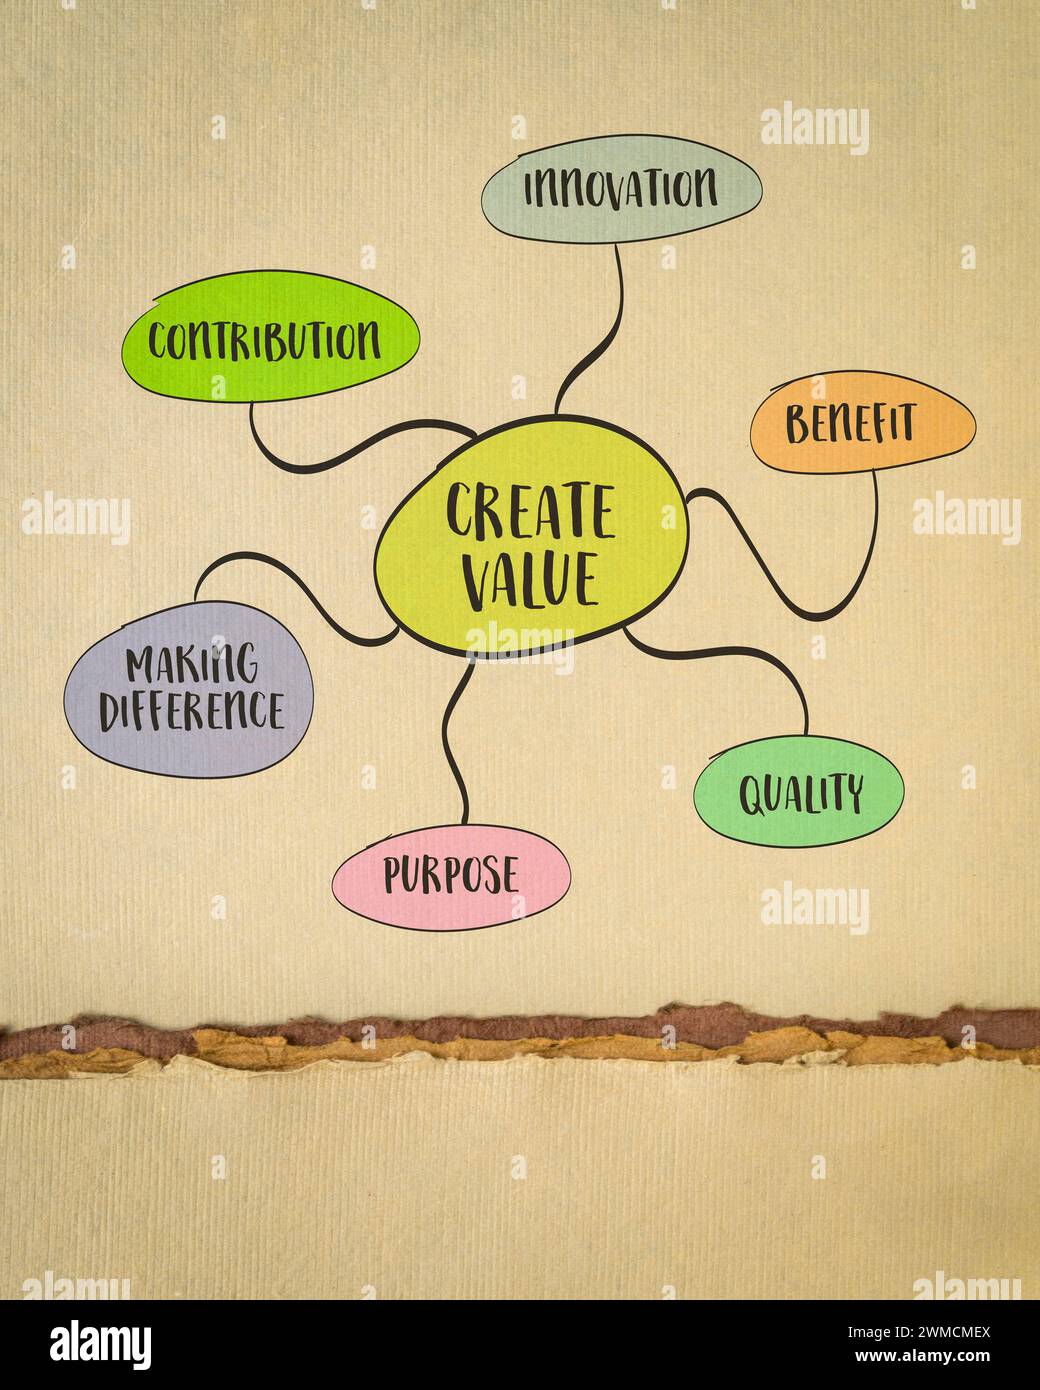 create value - mind map sketch on art paper, inspiration, creativity, contribution, making difference and business concept Stock Photo